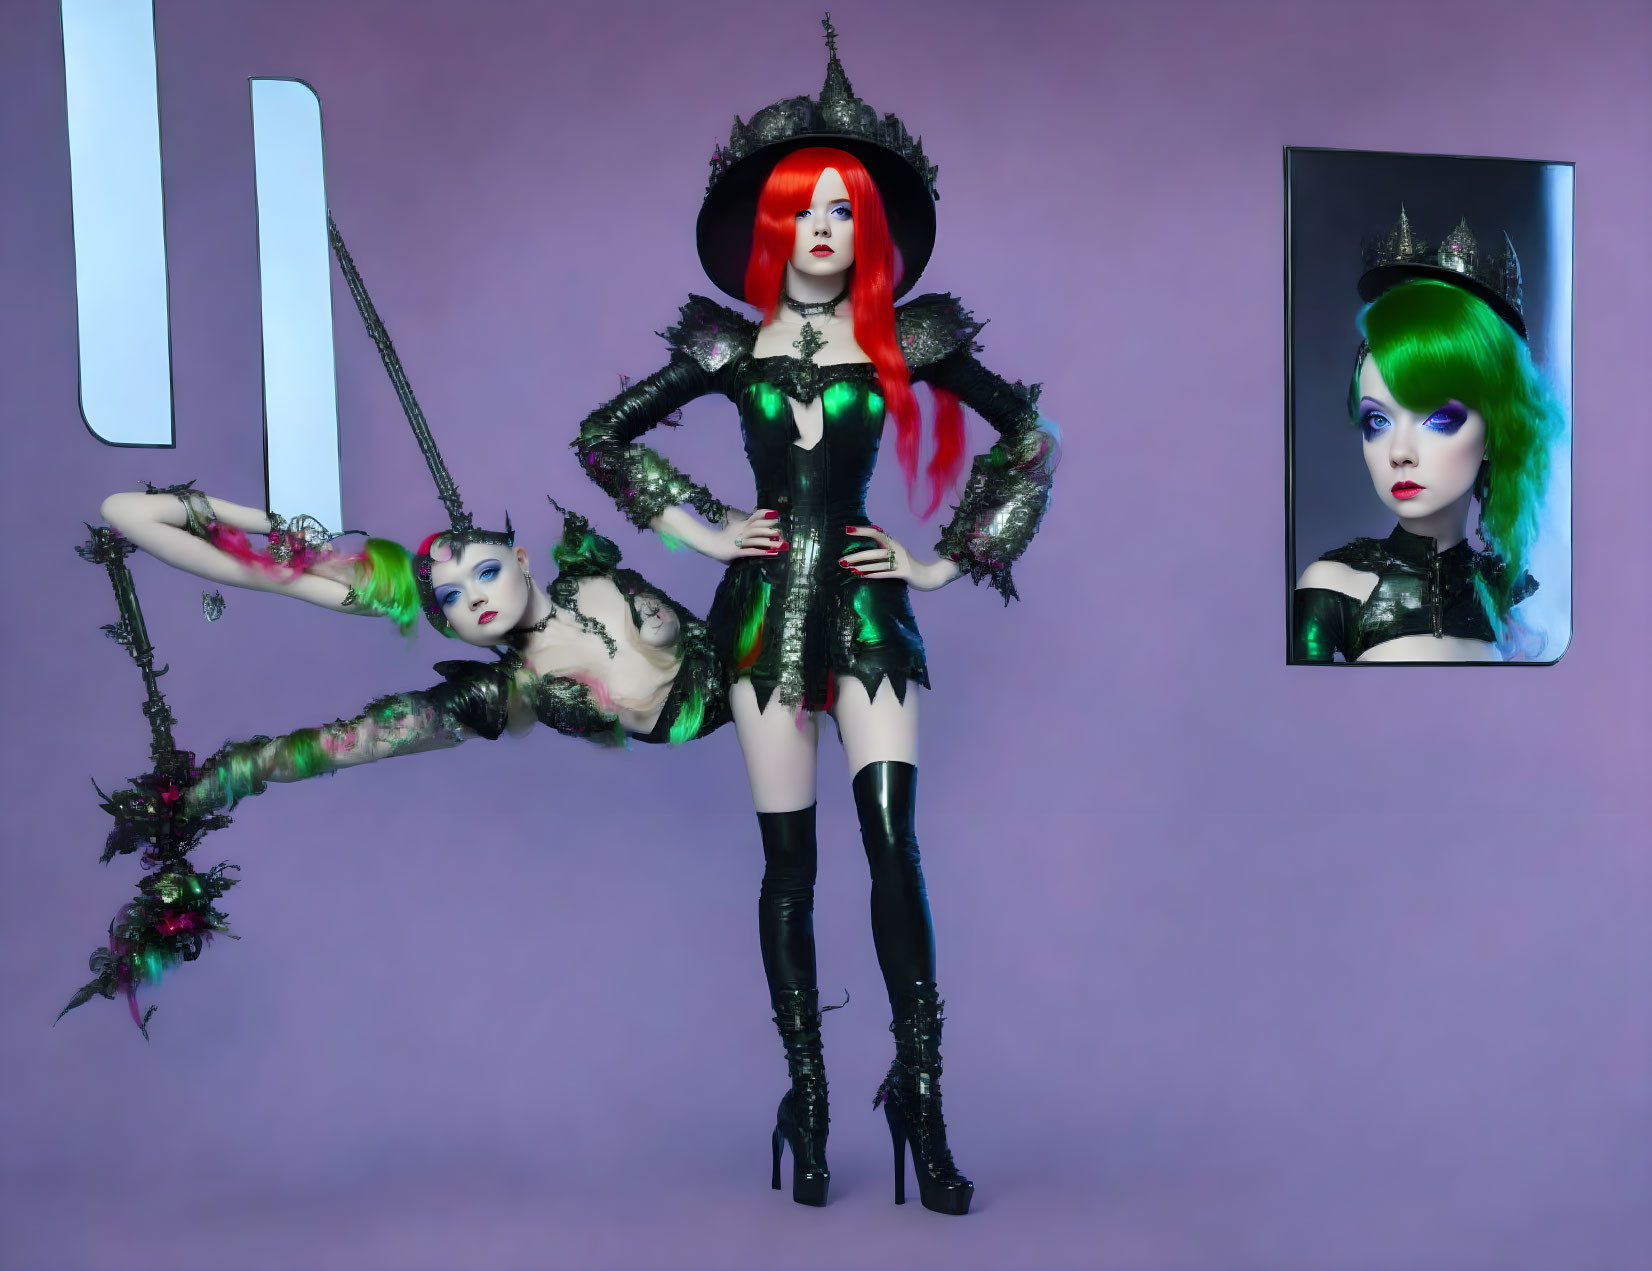 Three stylized female figures in colorful hair and gothic attire on purple background.